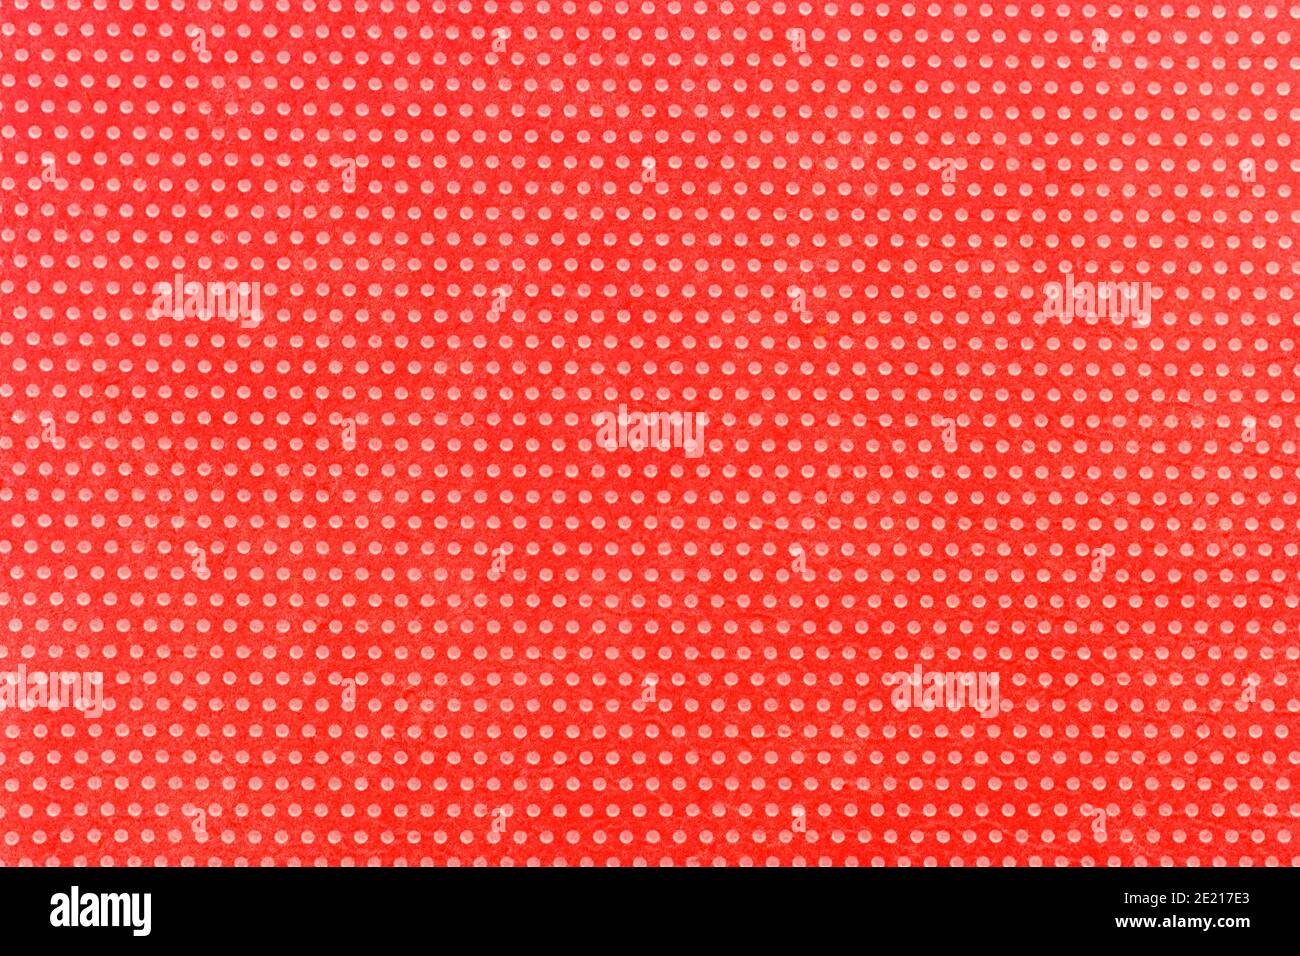 Textile homogeneous background color red in white fine polka dots, horizontal pattern. View from above. Emotionally funny. Stock Photo